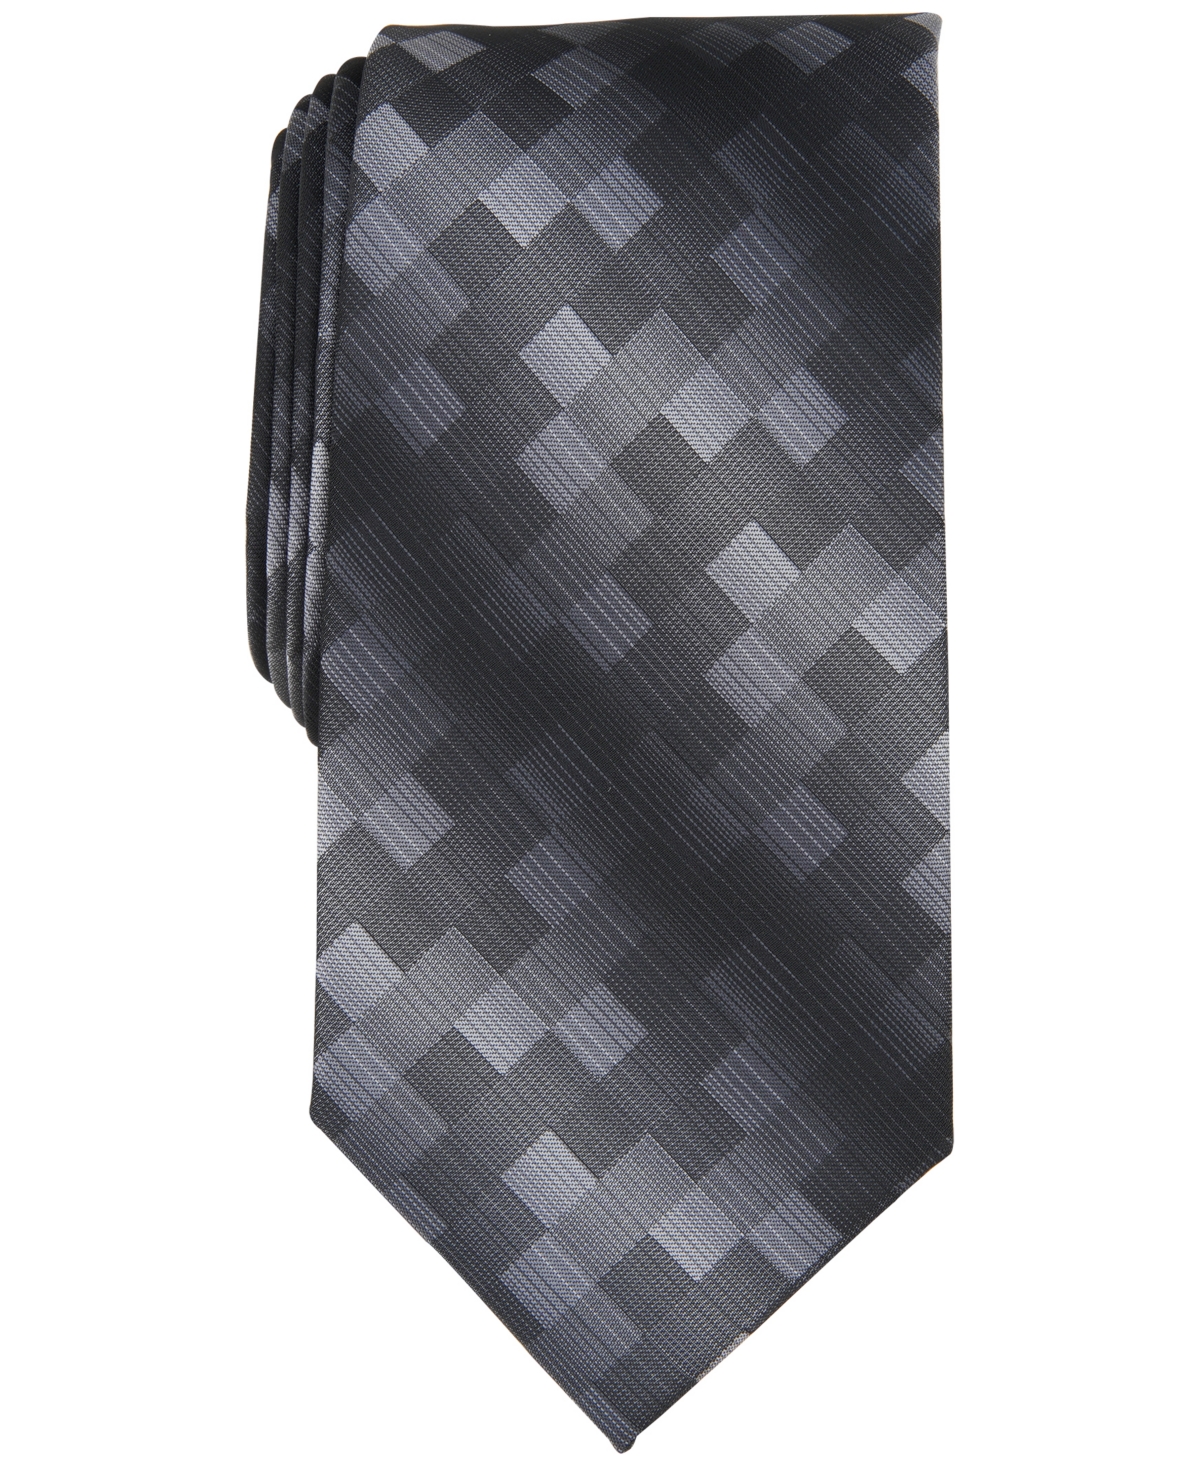 Men's Shaded Square Tie - Red